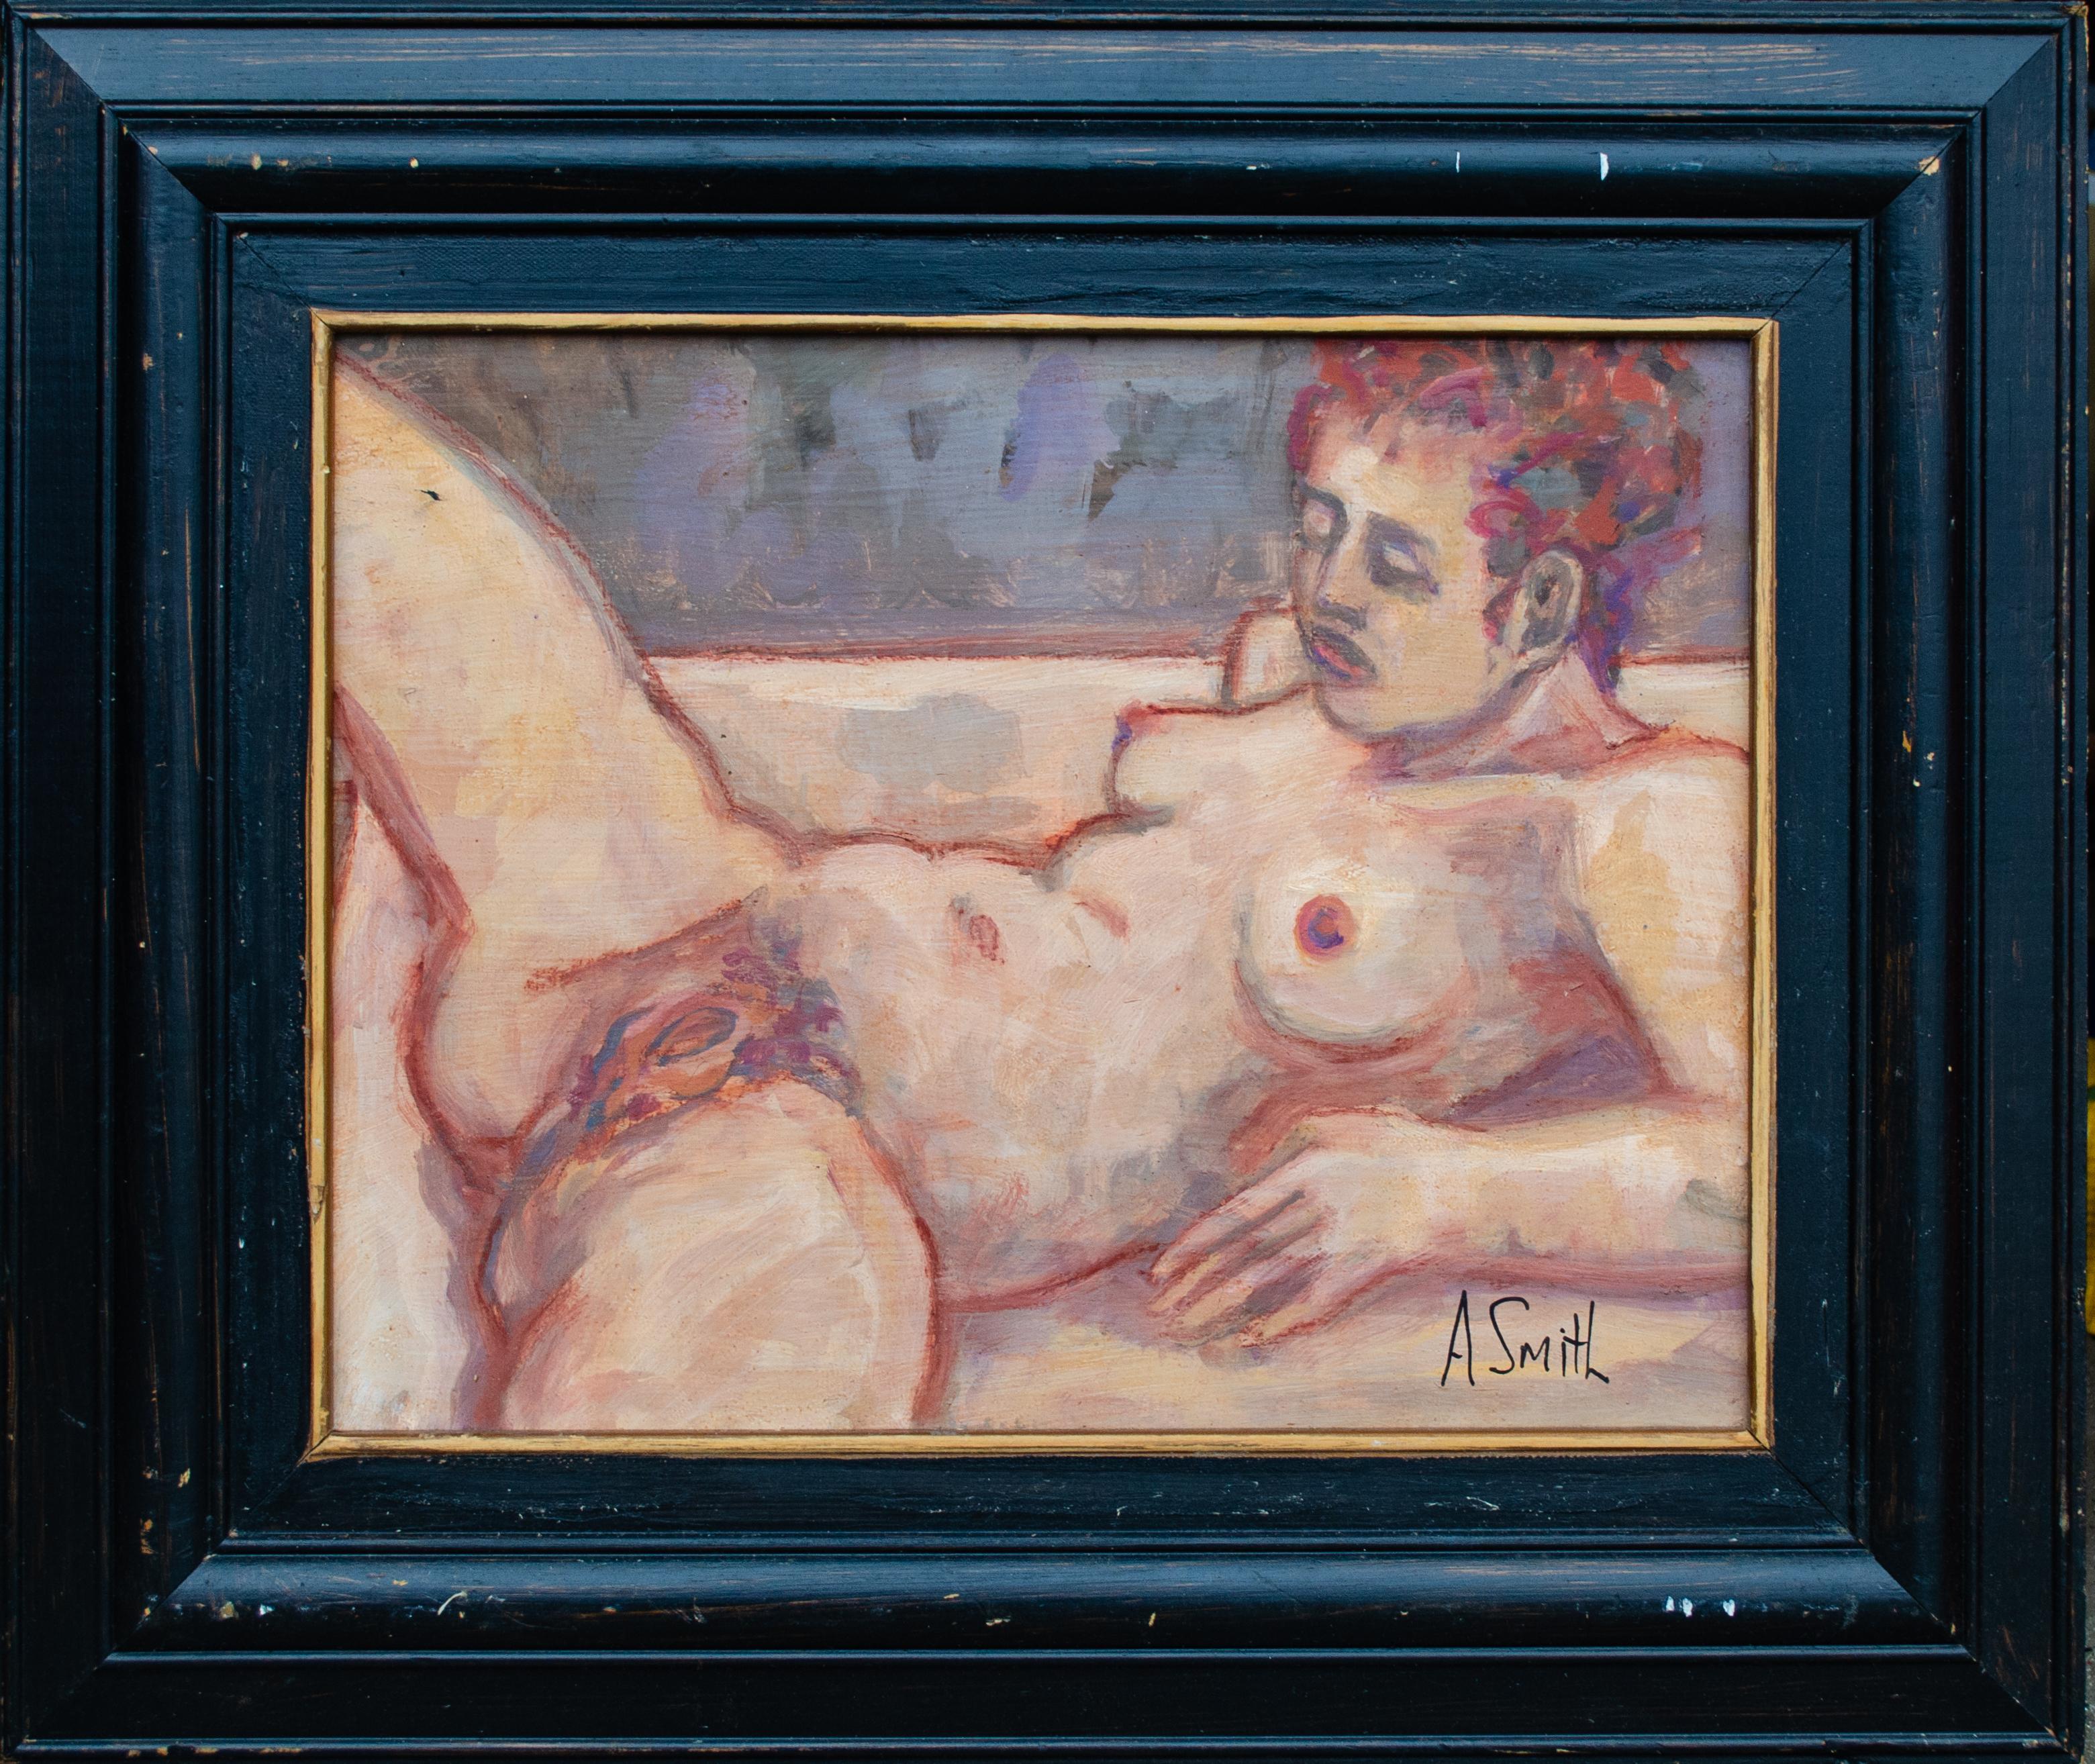 Arthur Smith (American, 1897-1972)
Untitled (Nude), 20th century
Oil on board
11 1/8 x 14 in. 
Framed: 17 x 20 in. 
Signed lower right: A Smith

Arthur Smith is a listed American painter most famous for his paintings of sporting scenes, particularly